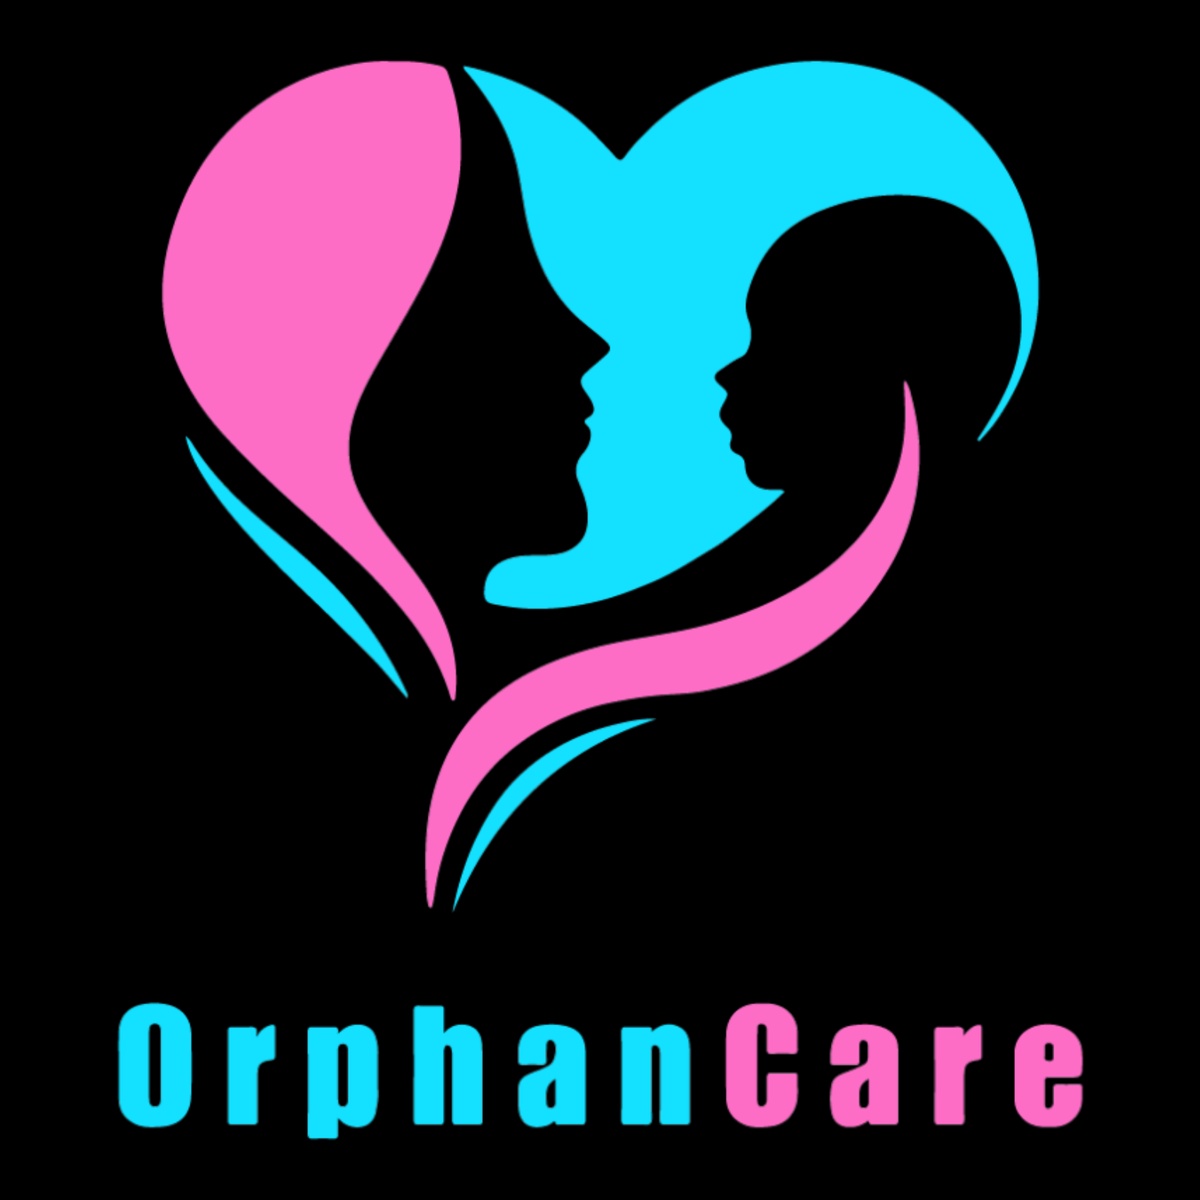 What is the role of the Orphan Foundation